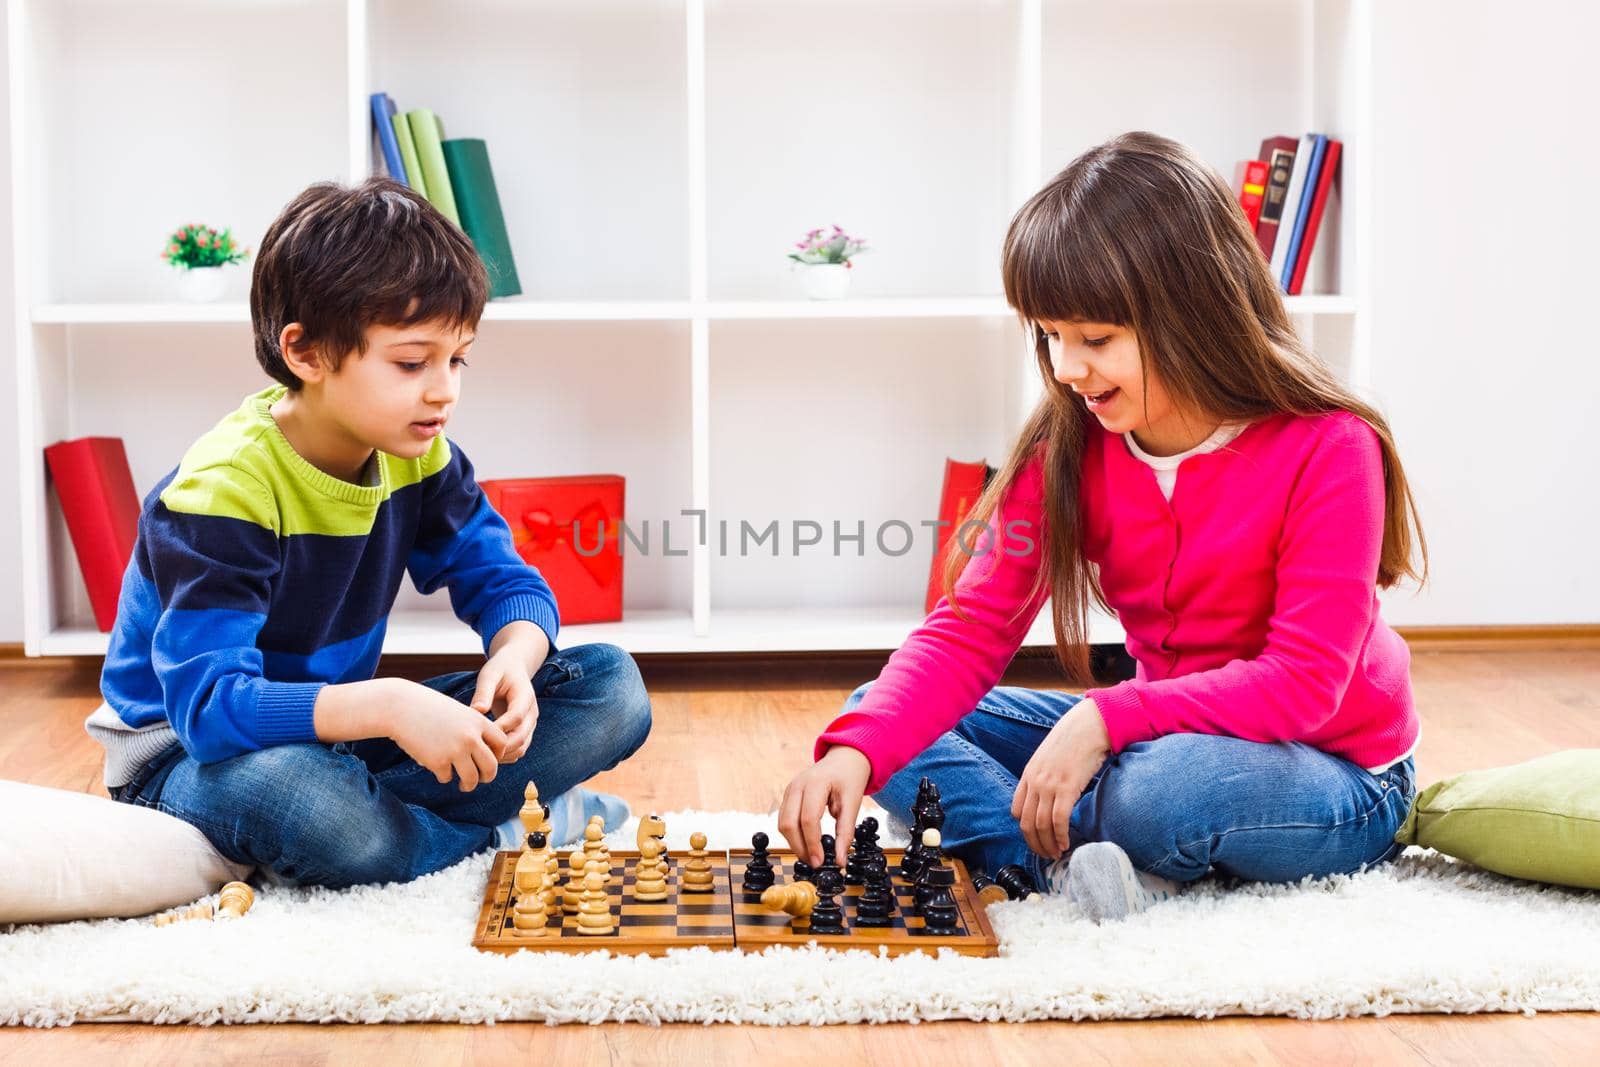 Image of children playing chess at home.